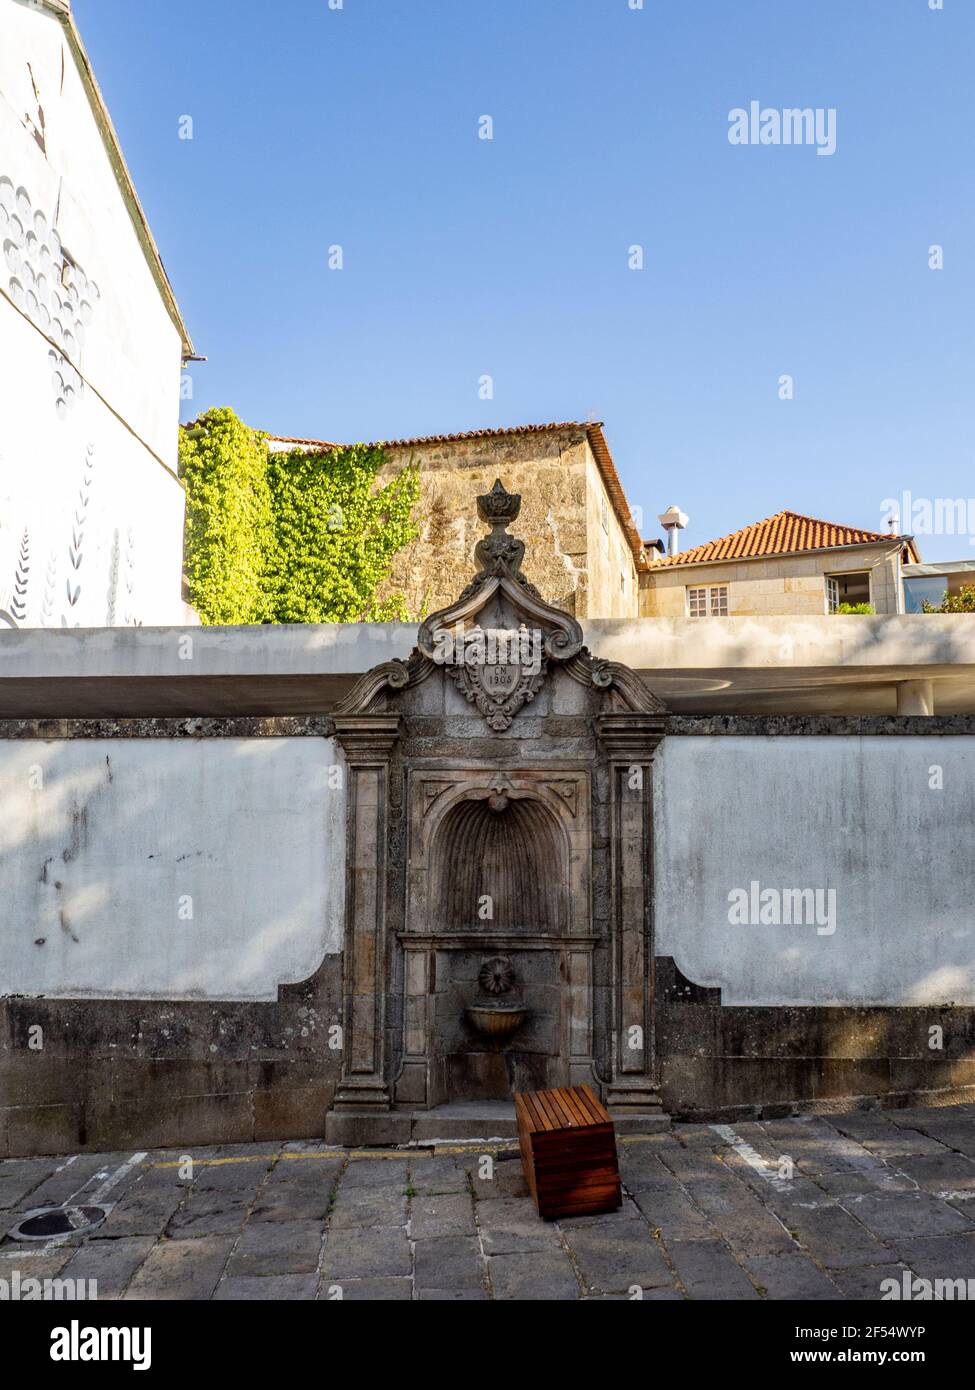 Viseu, Portugal; August 2020: view of one of the fountains adorning the historic city of Viseu, Portugal Stock Photo